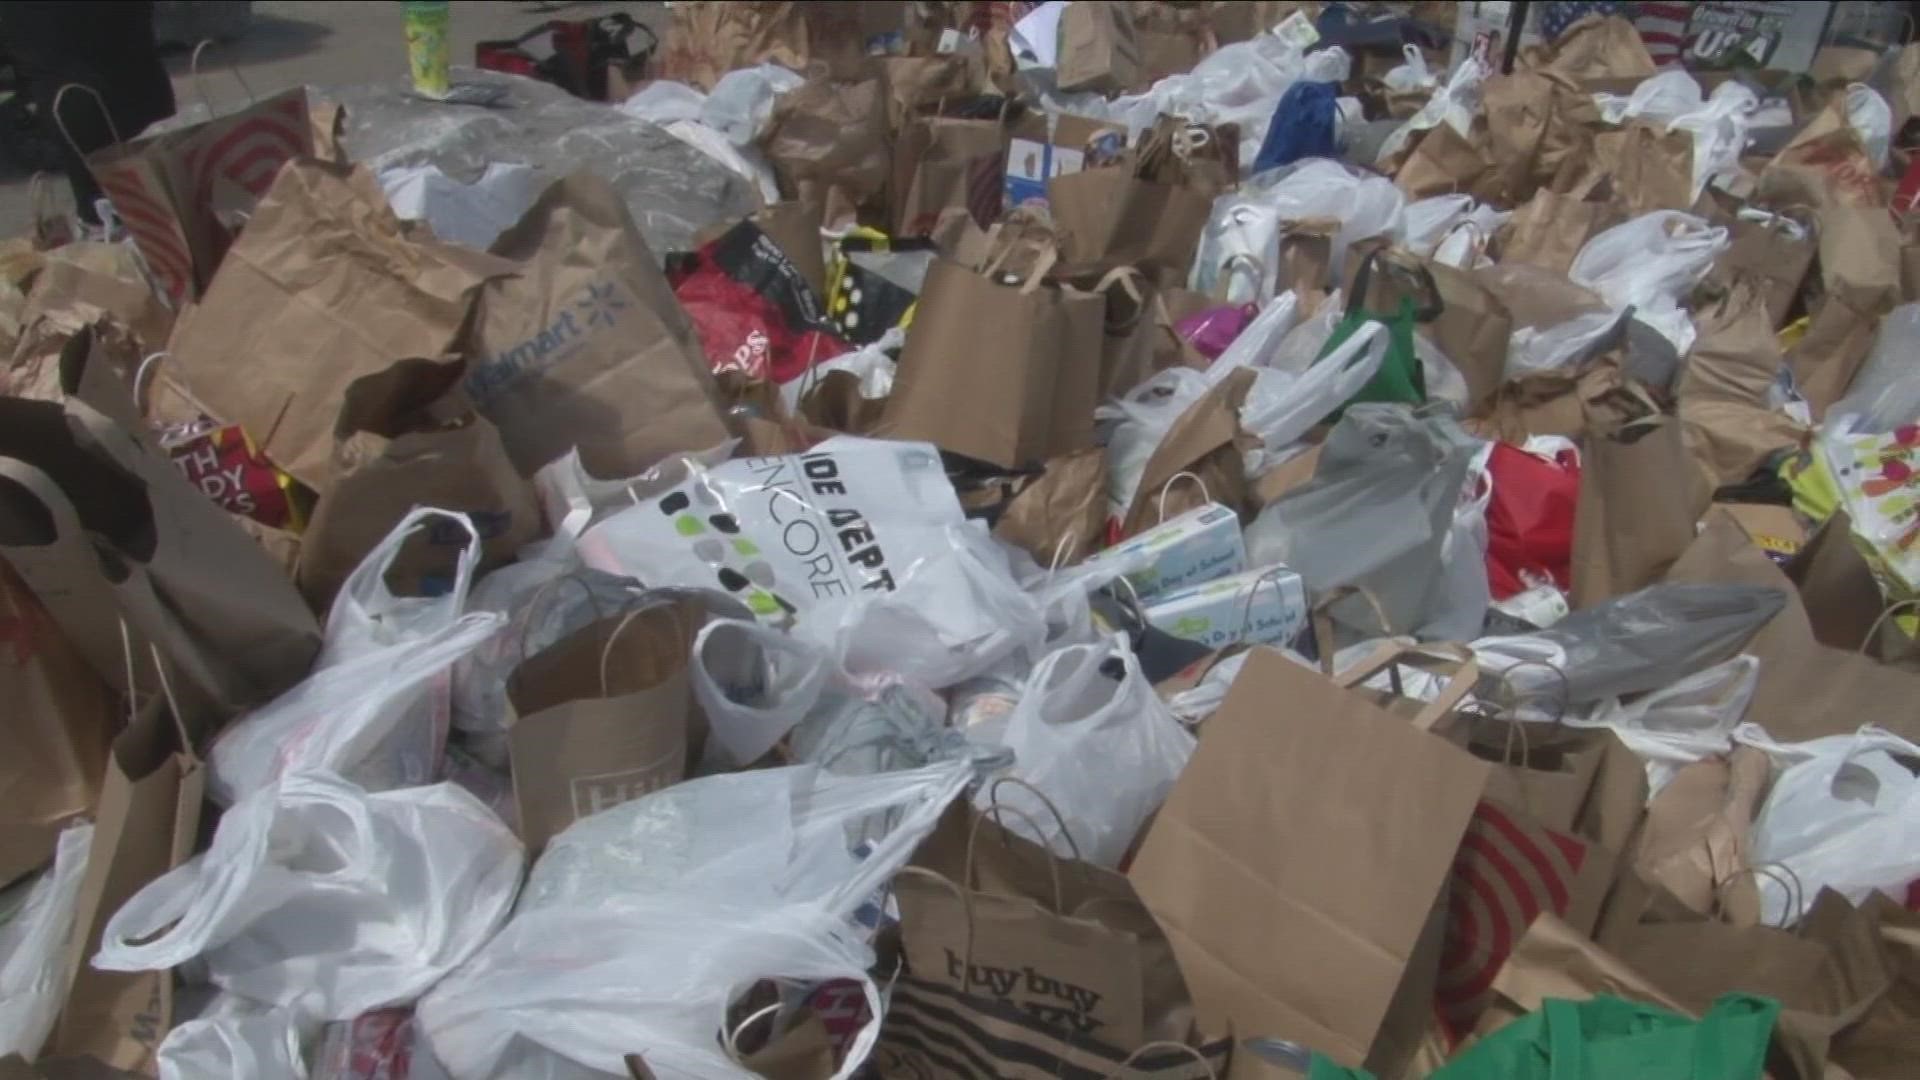 Overwhelming response at Erie Co Fair food drive